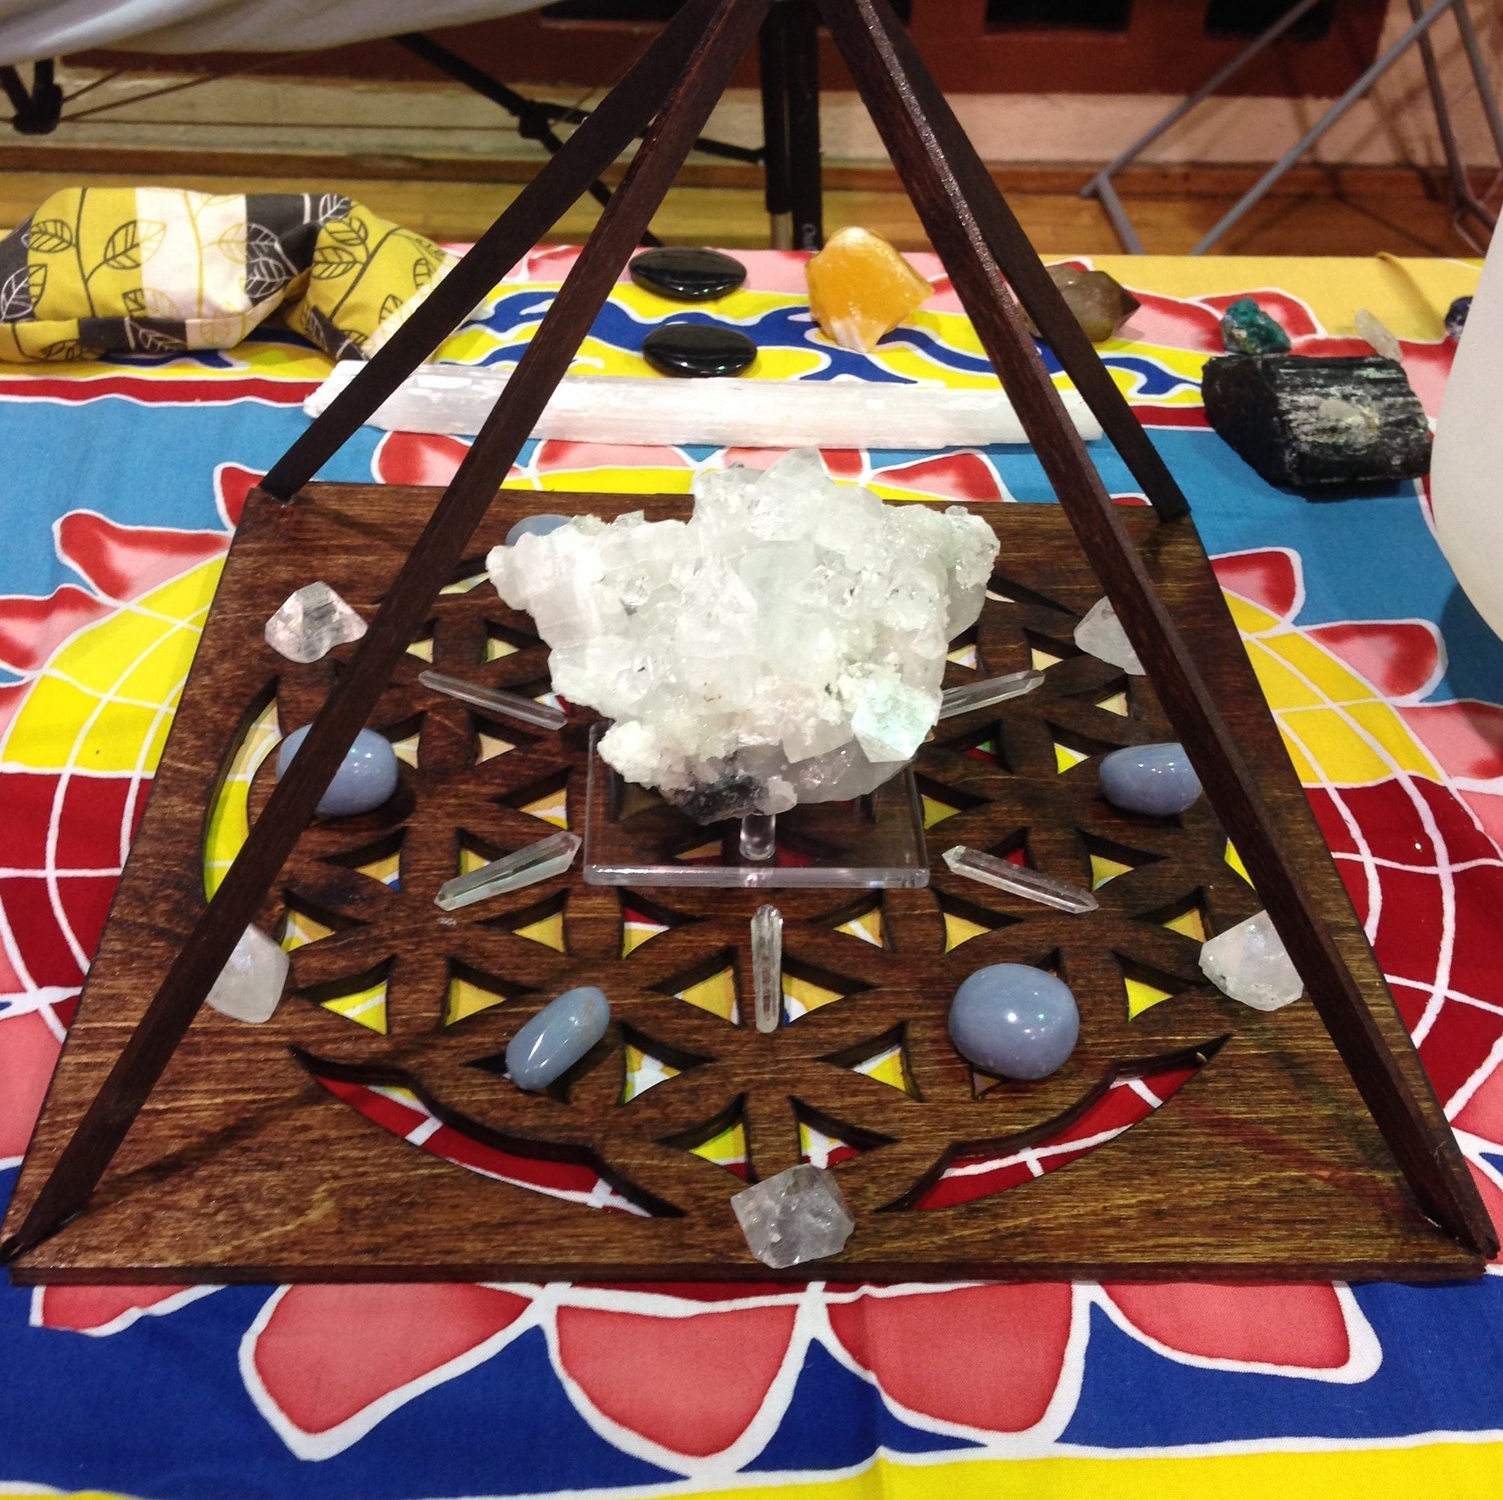  High vibration grid for upper chakra work at the Spirit of Oneness Expo. Includes apophyllite, angelite and clear quartz. 